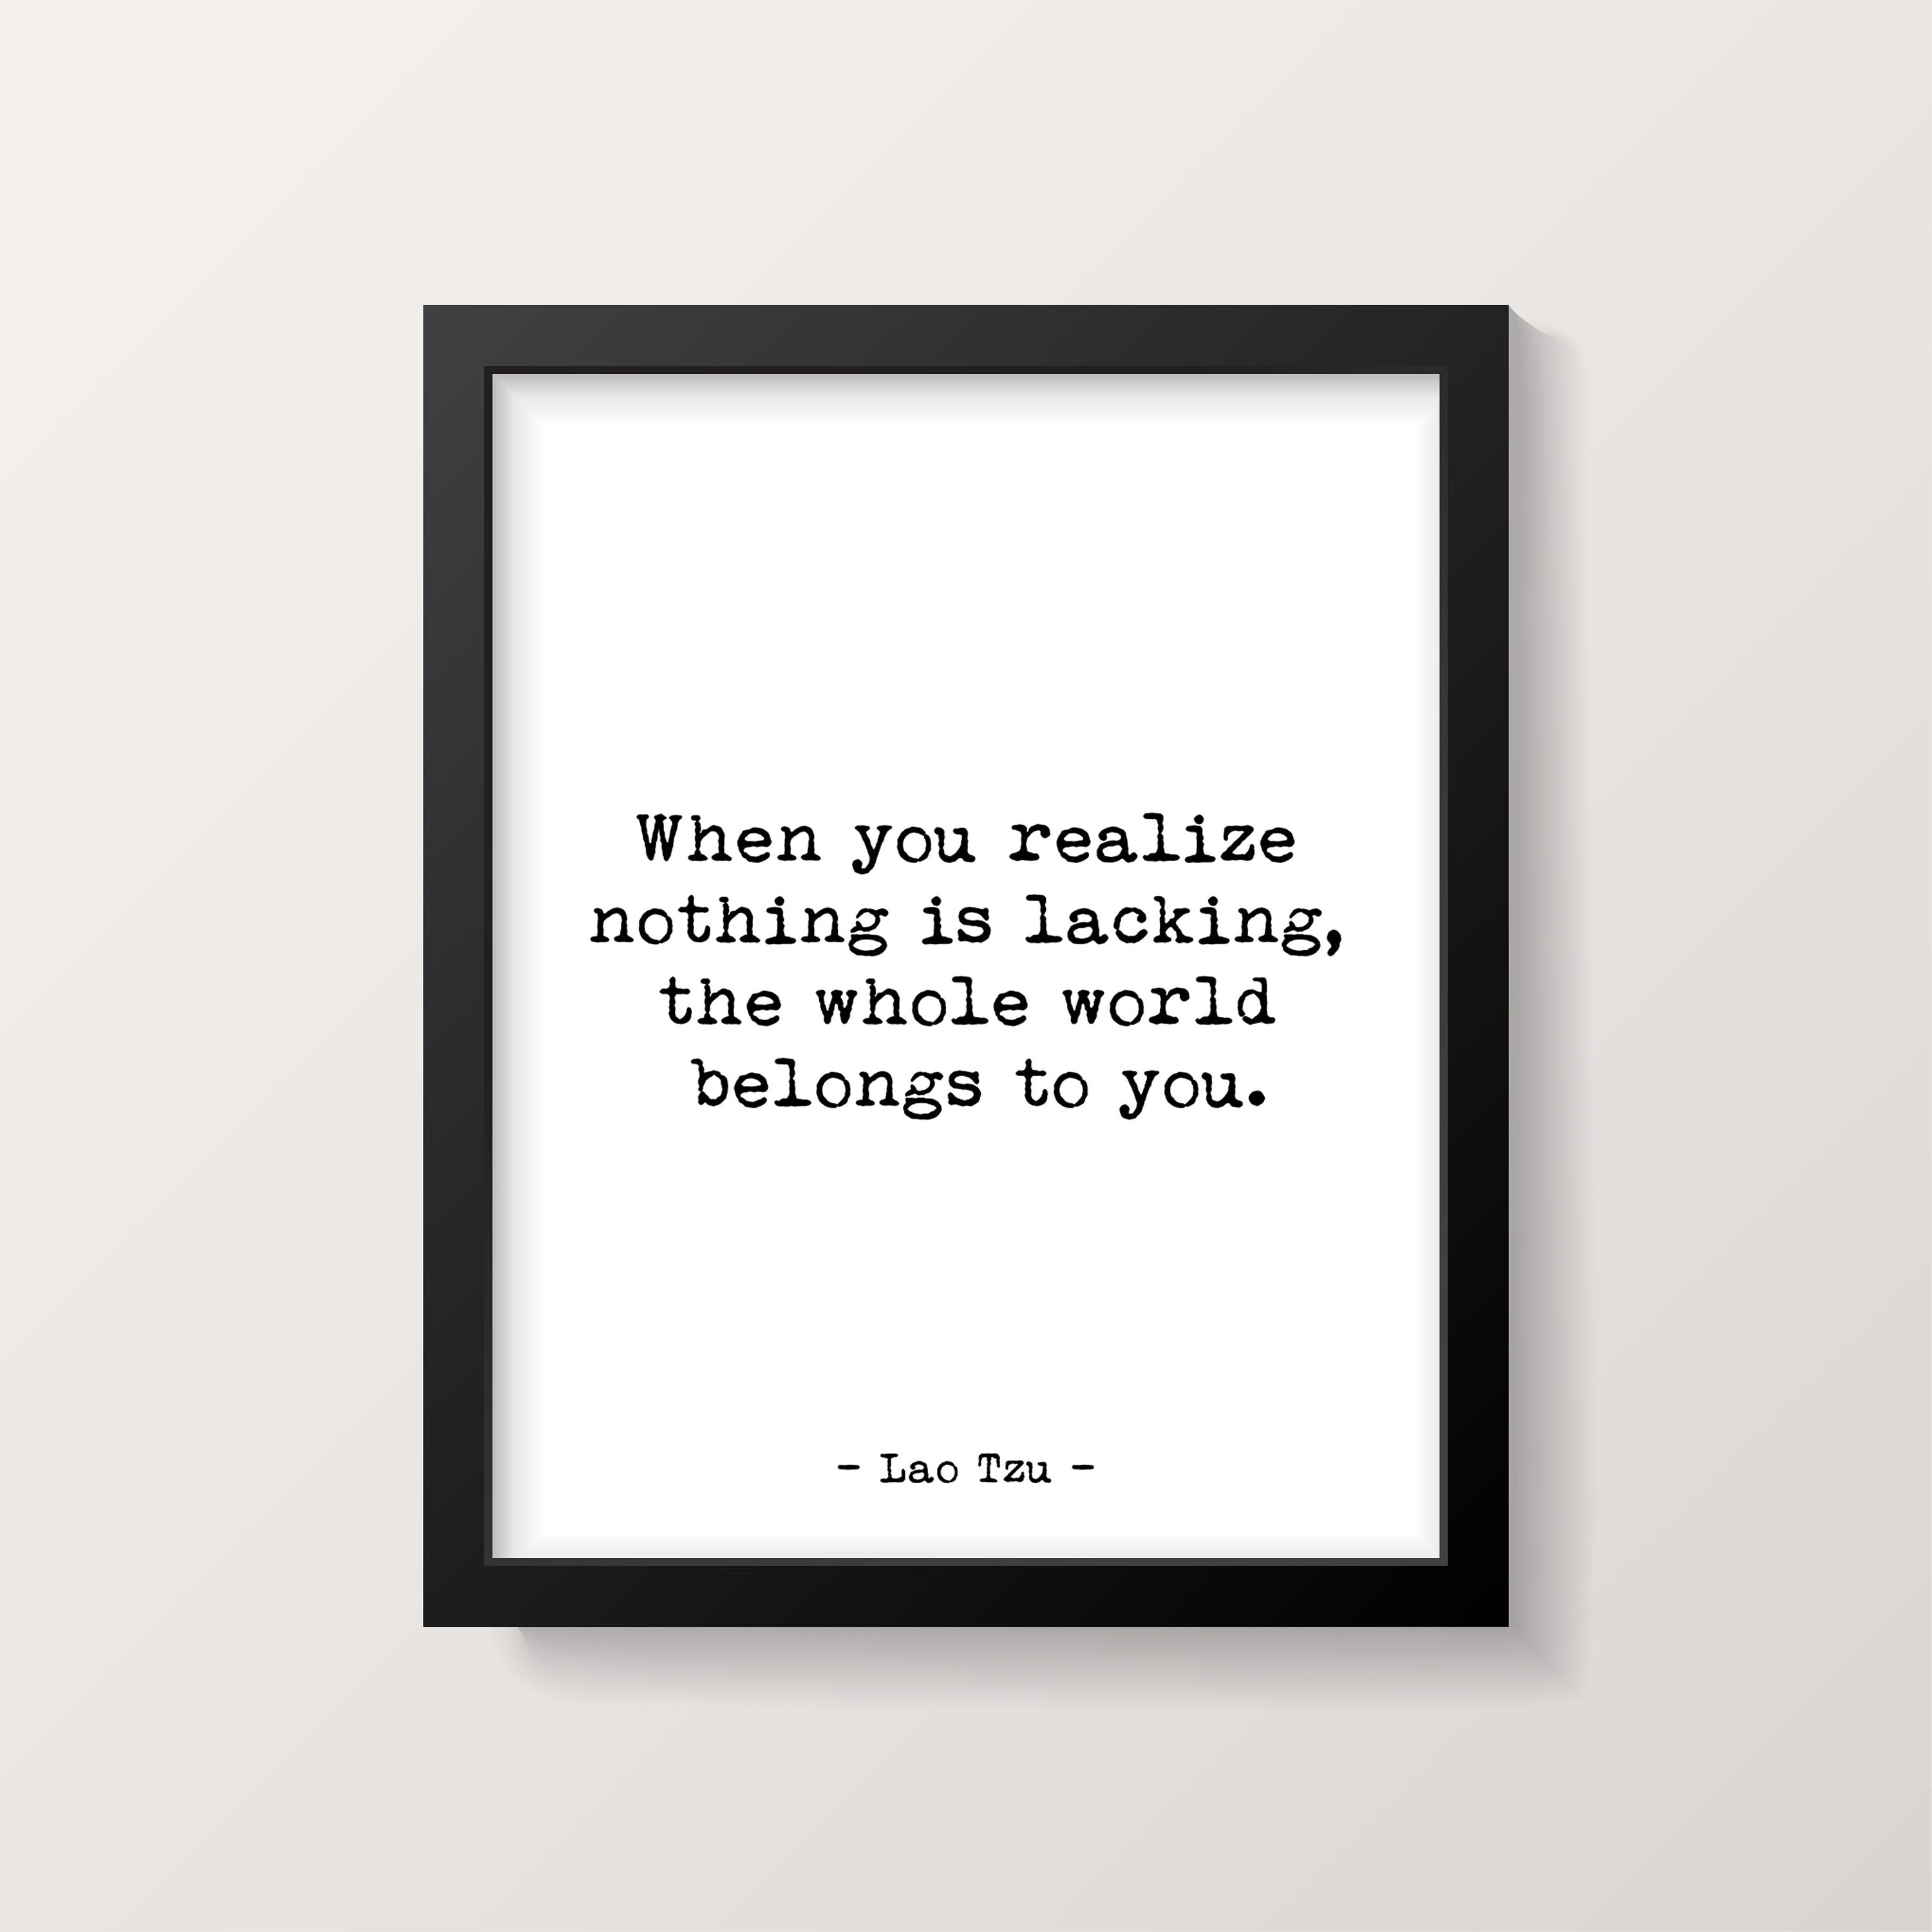 Lao Tzu Quote When You Realize Nothing is Lacking - Etsy